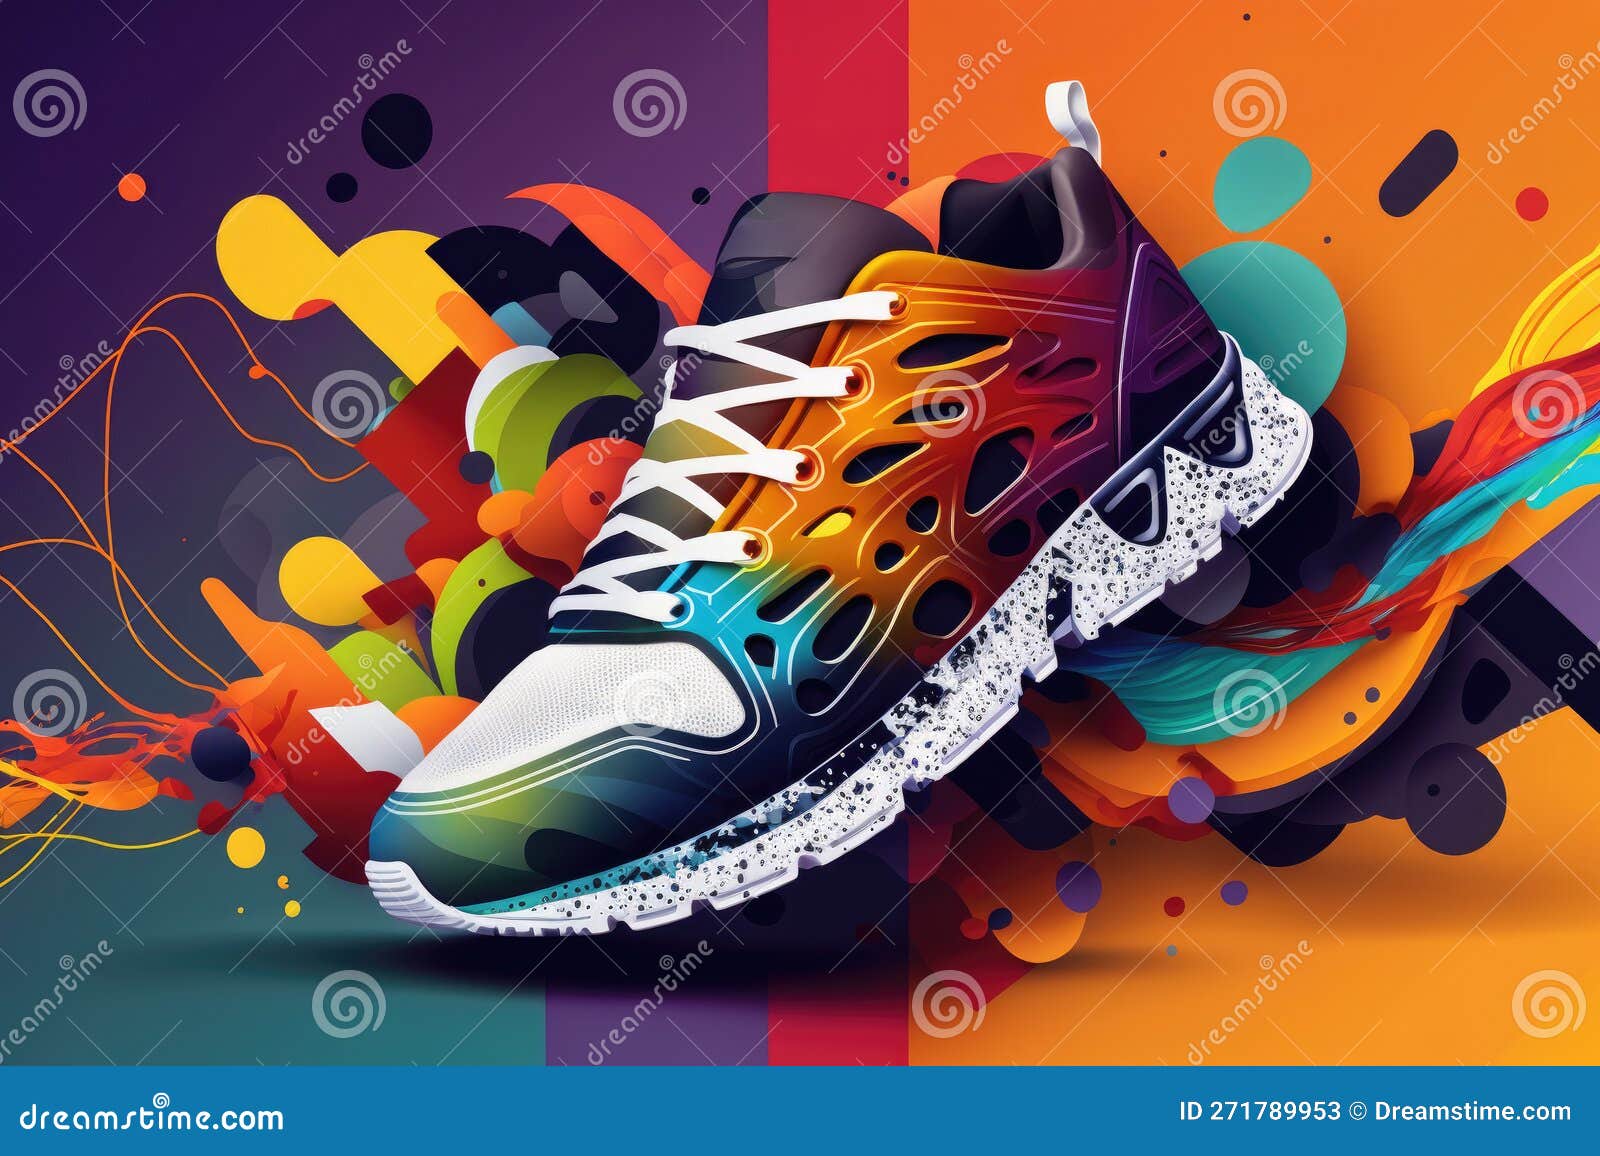 Creative Bright Colorful Sneakers on Abstract Background. Sport ...